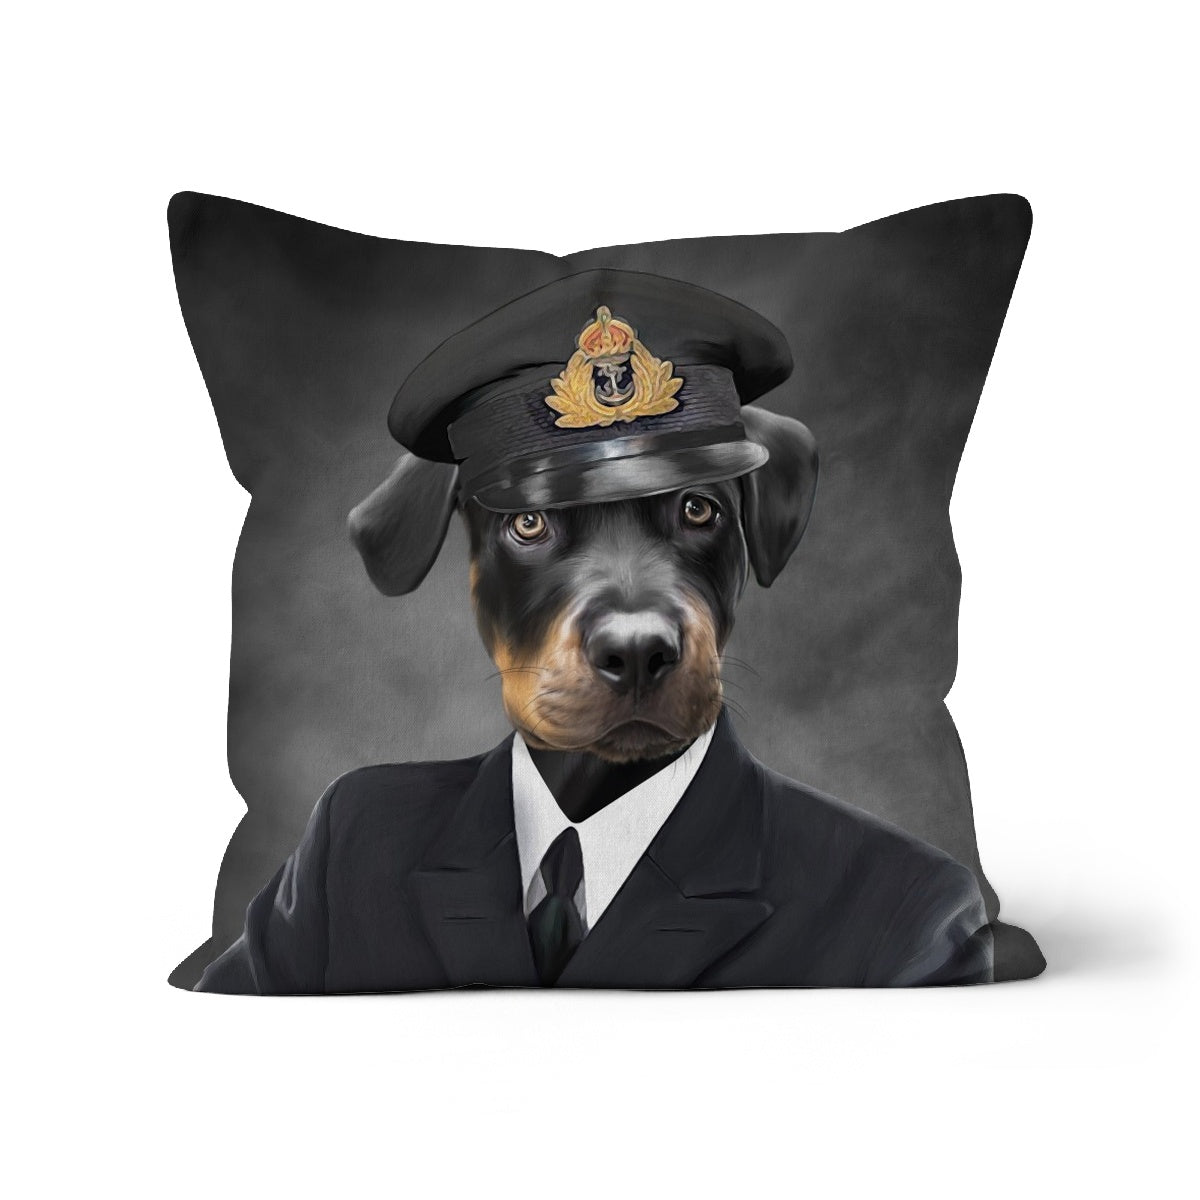 paw and glory,  pawandglory, custom pillow of your pet, print pet on pillow, personalised cat pillow, dog shaped pillows